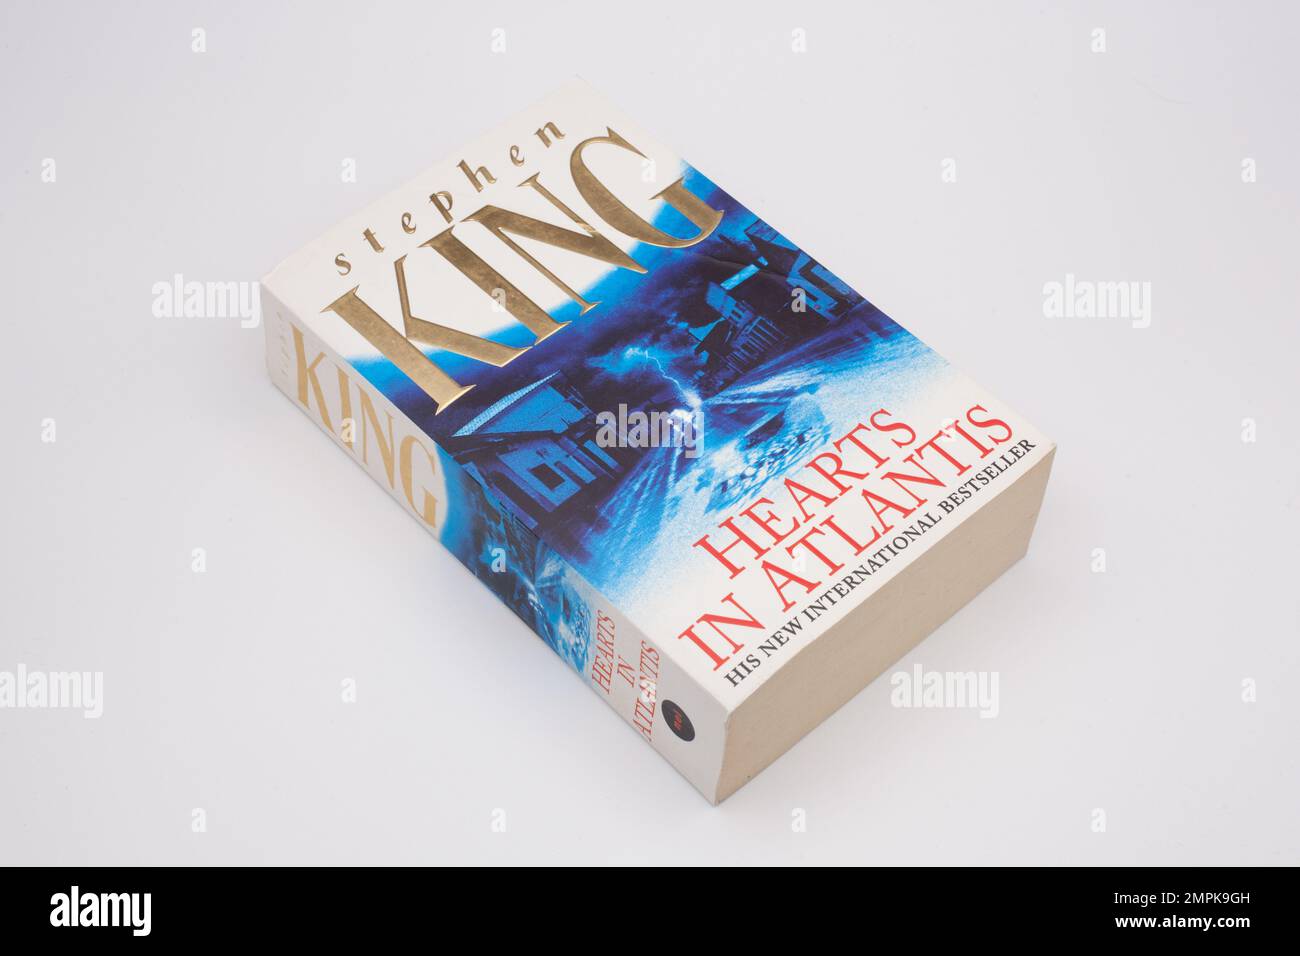 The book, Hearts in Atlantis by Stephen King Stock Photo